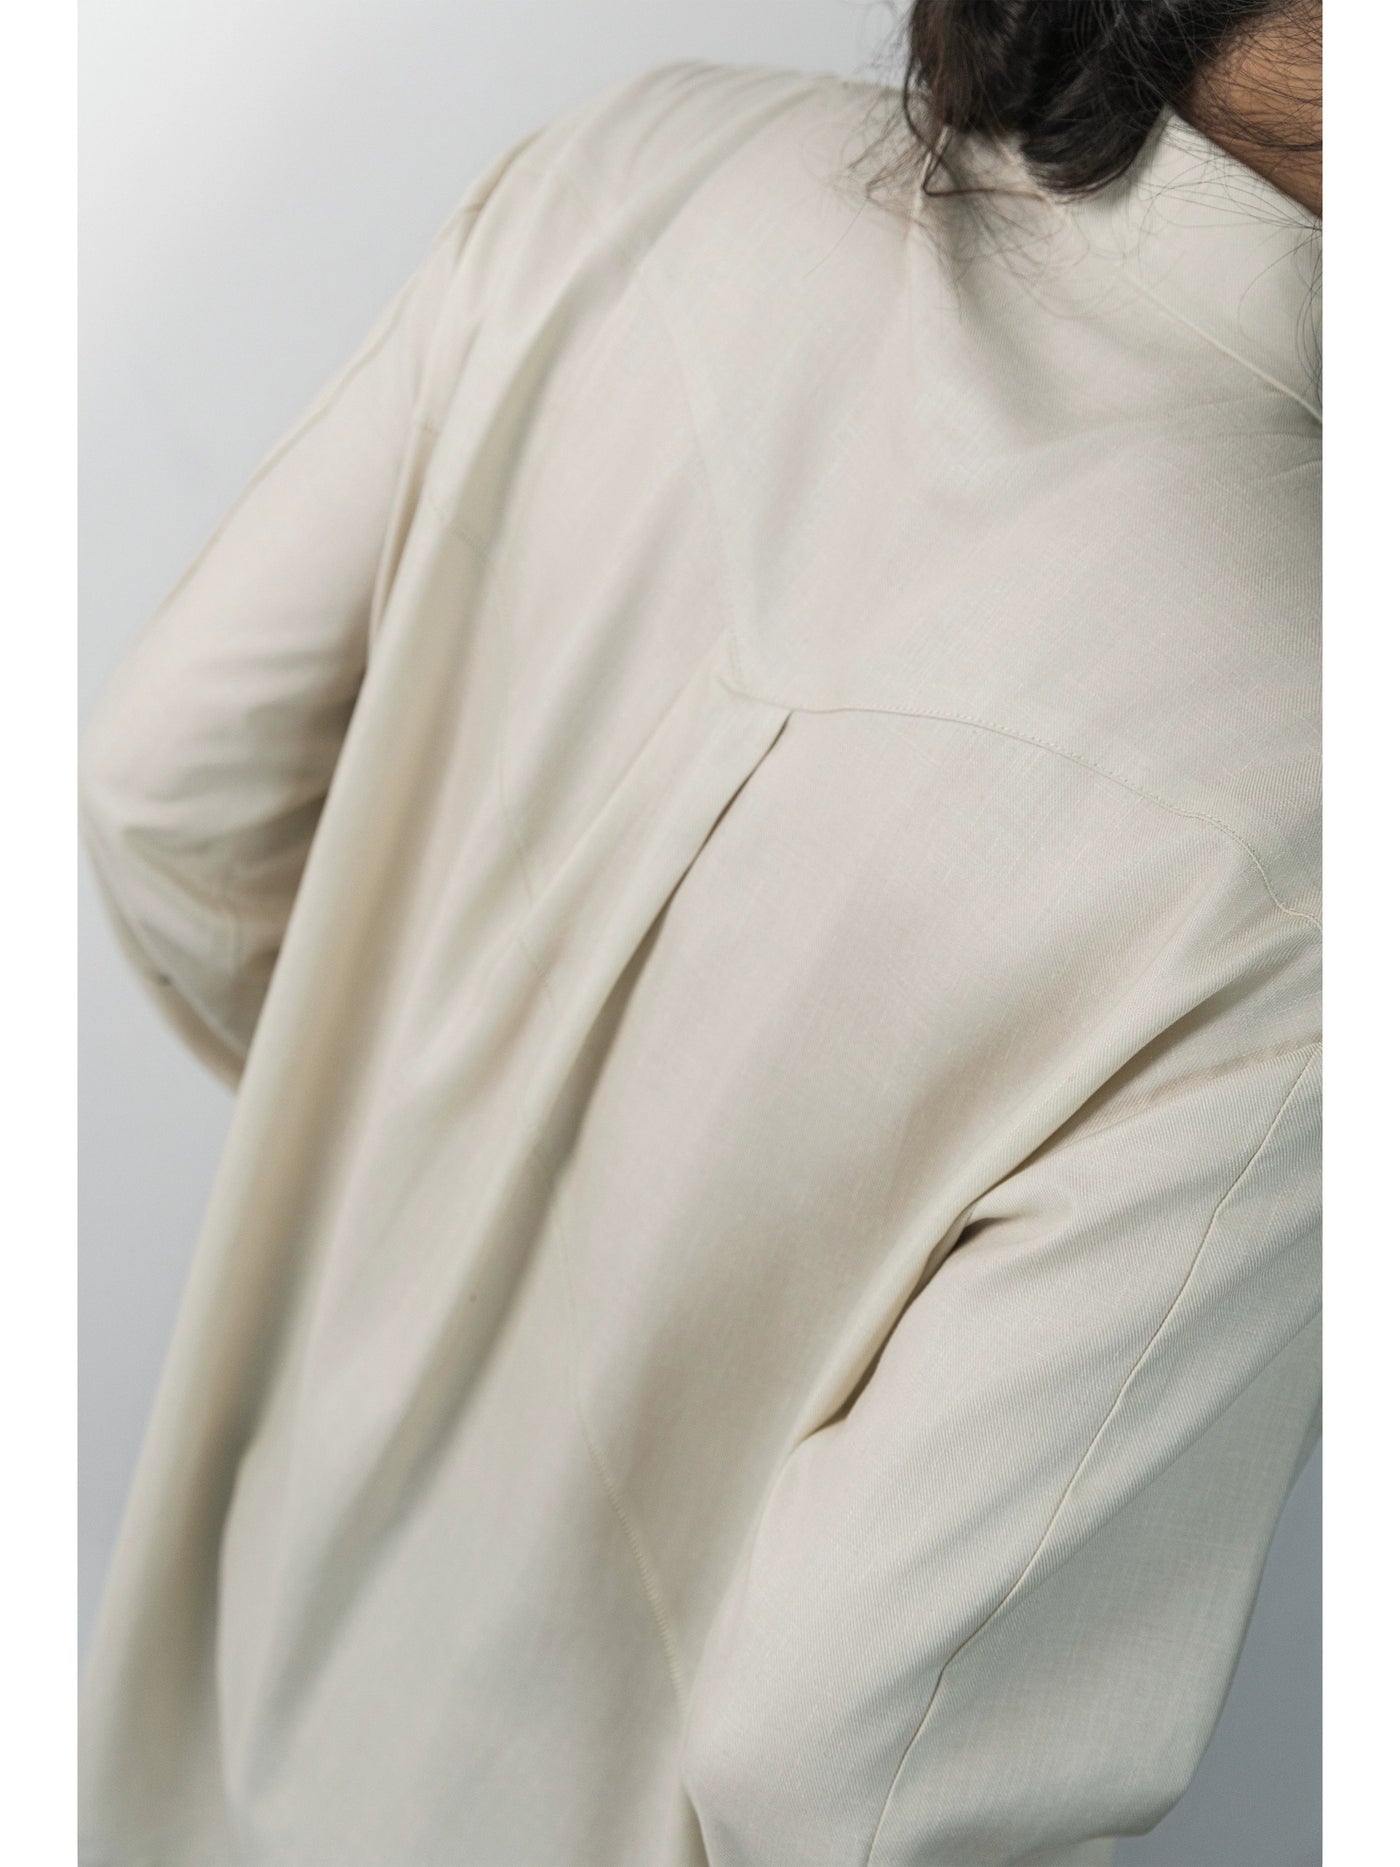 Relaxed Fit Buttoned Shirt Korean Street Fashion Shirt By ILNya Shop Online at OH Vault